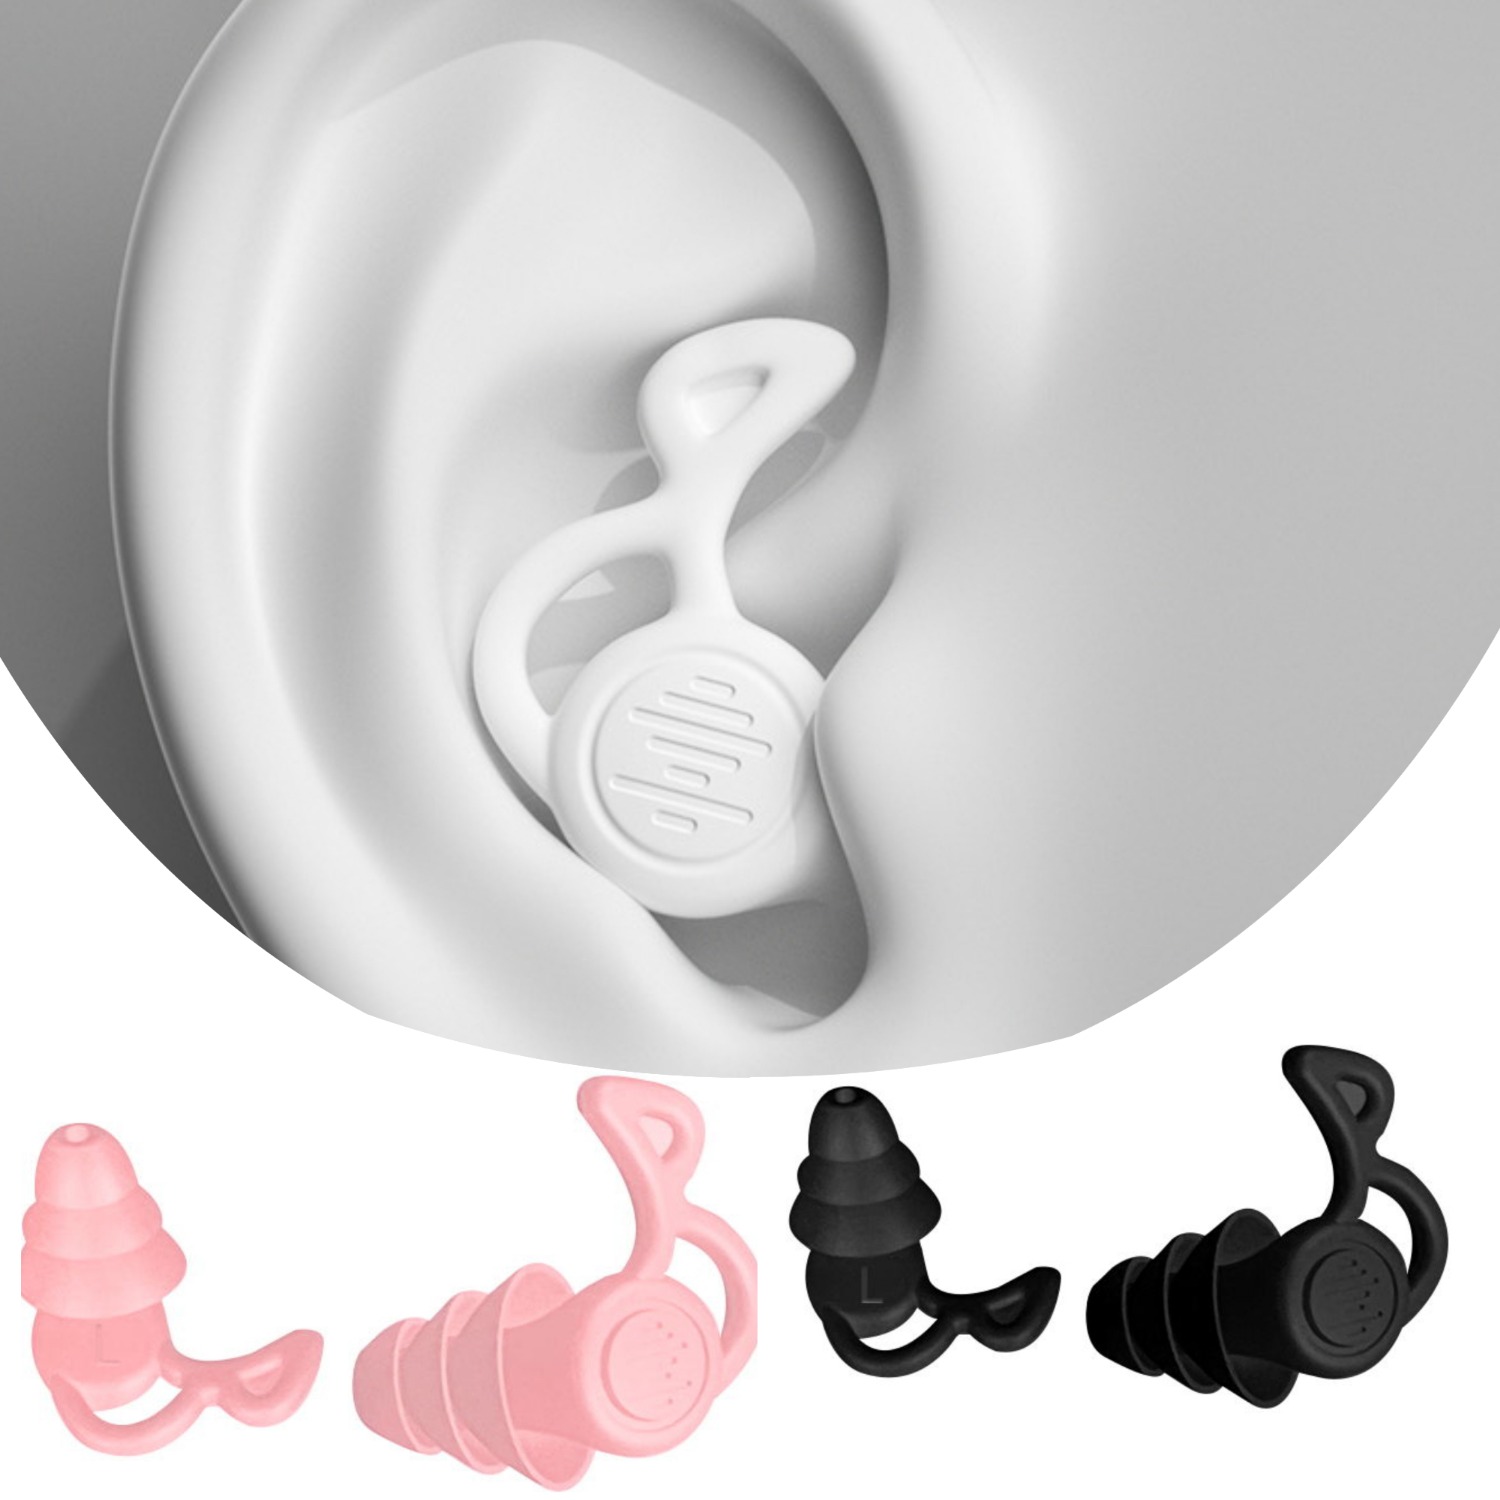 

2pcs Special Super Soundproof Anti-noise Soundproof Device, Noise Reduction Nano Sleep Earplugs, For Sleeping And Sleeping